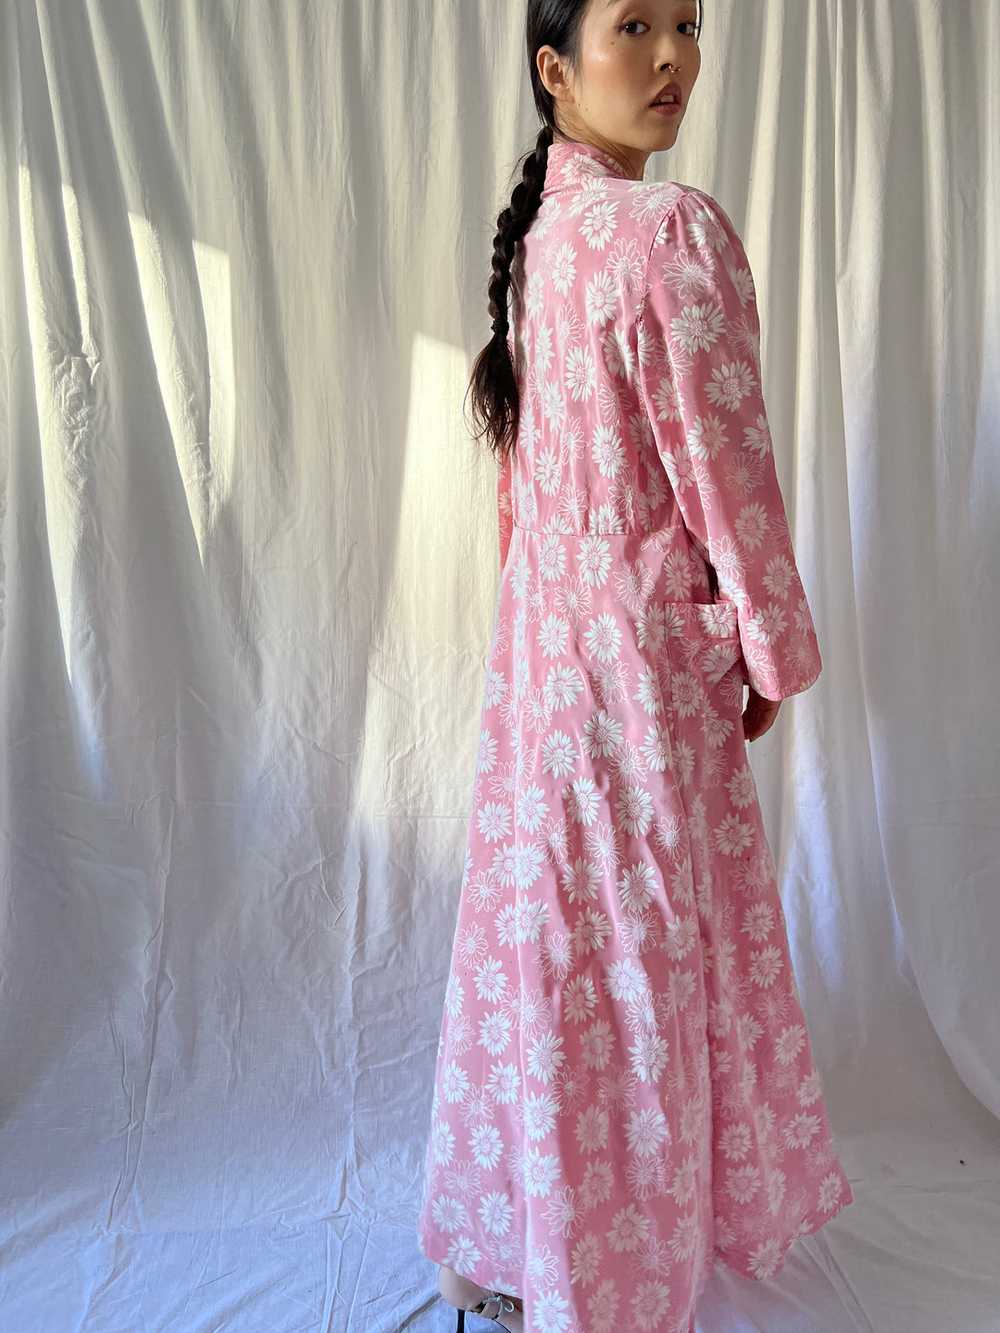 Vintage 1930s pink daisies gown robe - image 3